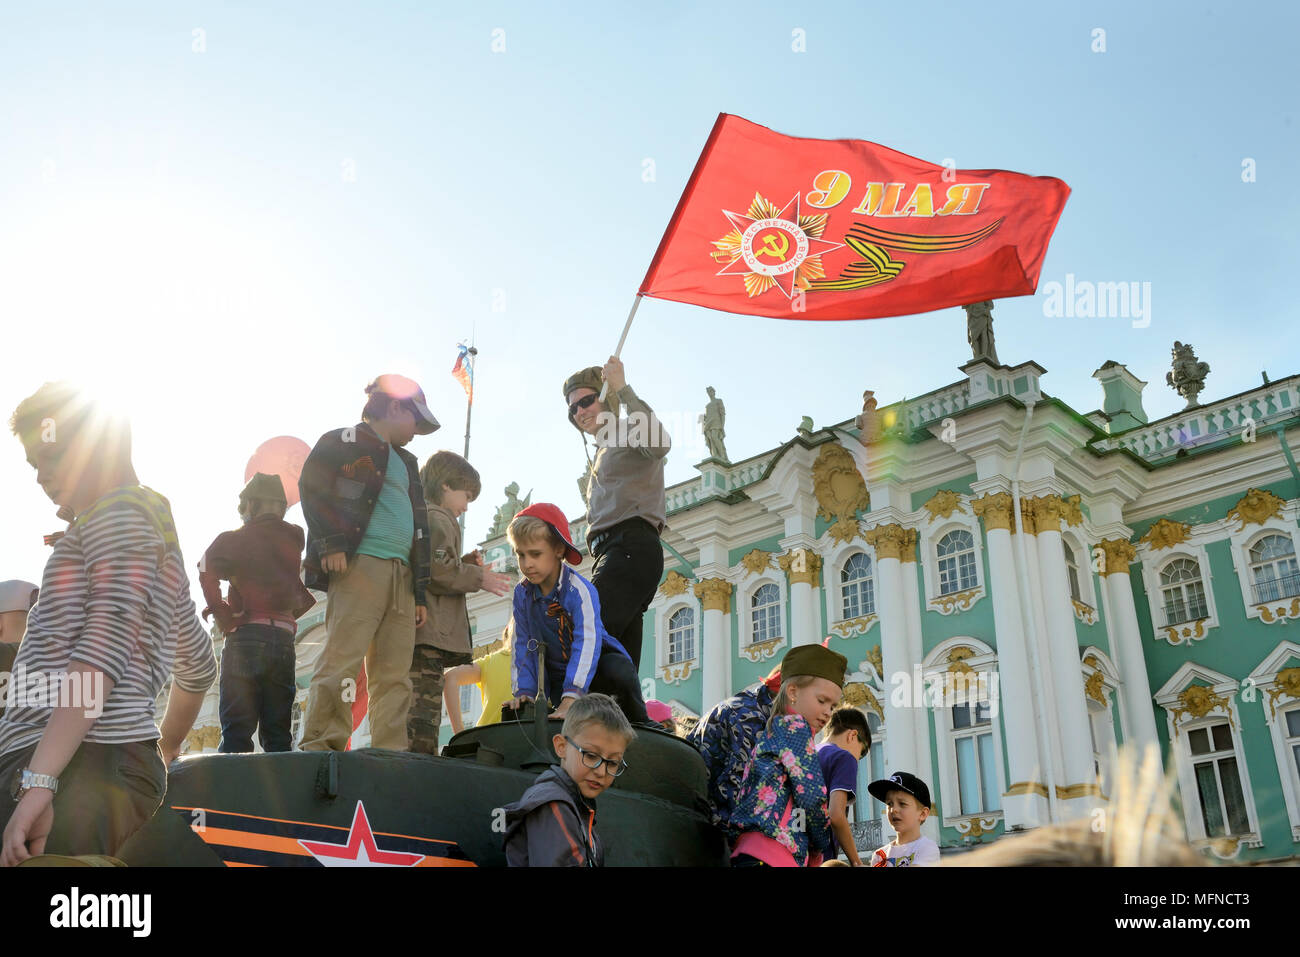 A man in a tankman's helmet is holding a flag on a combat vehicle, the children are near, Dvortsovaya Square, Russia Stock Photo